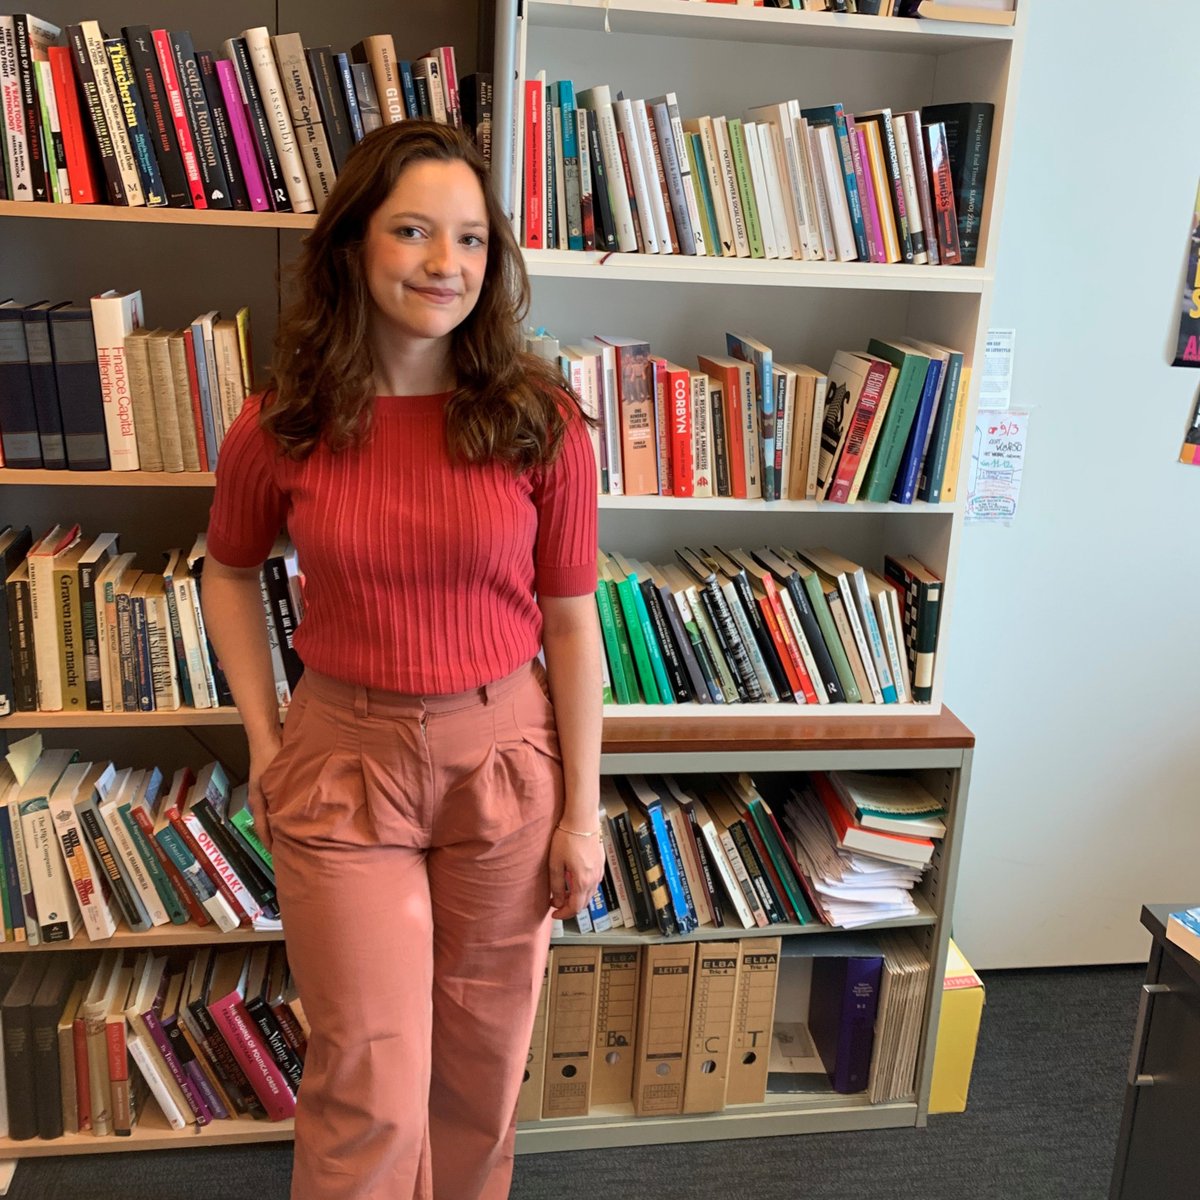 🌟 Welcome @MThewis, our new VUB POLI PhD researcher i! 🎓 Her focus on 'Symbolic Representation in Politics' is a valuable addition to our department. Margot is also part of the exciting EDGE project, and we can't wait to see her contributions unfold! 🗳️✨